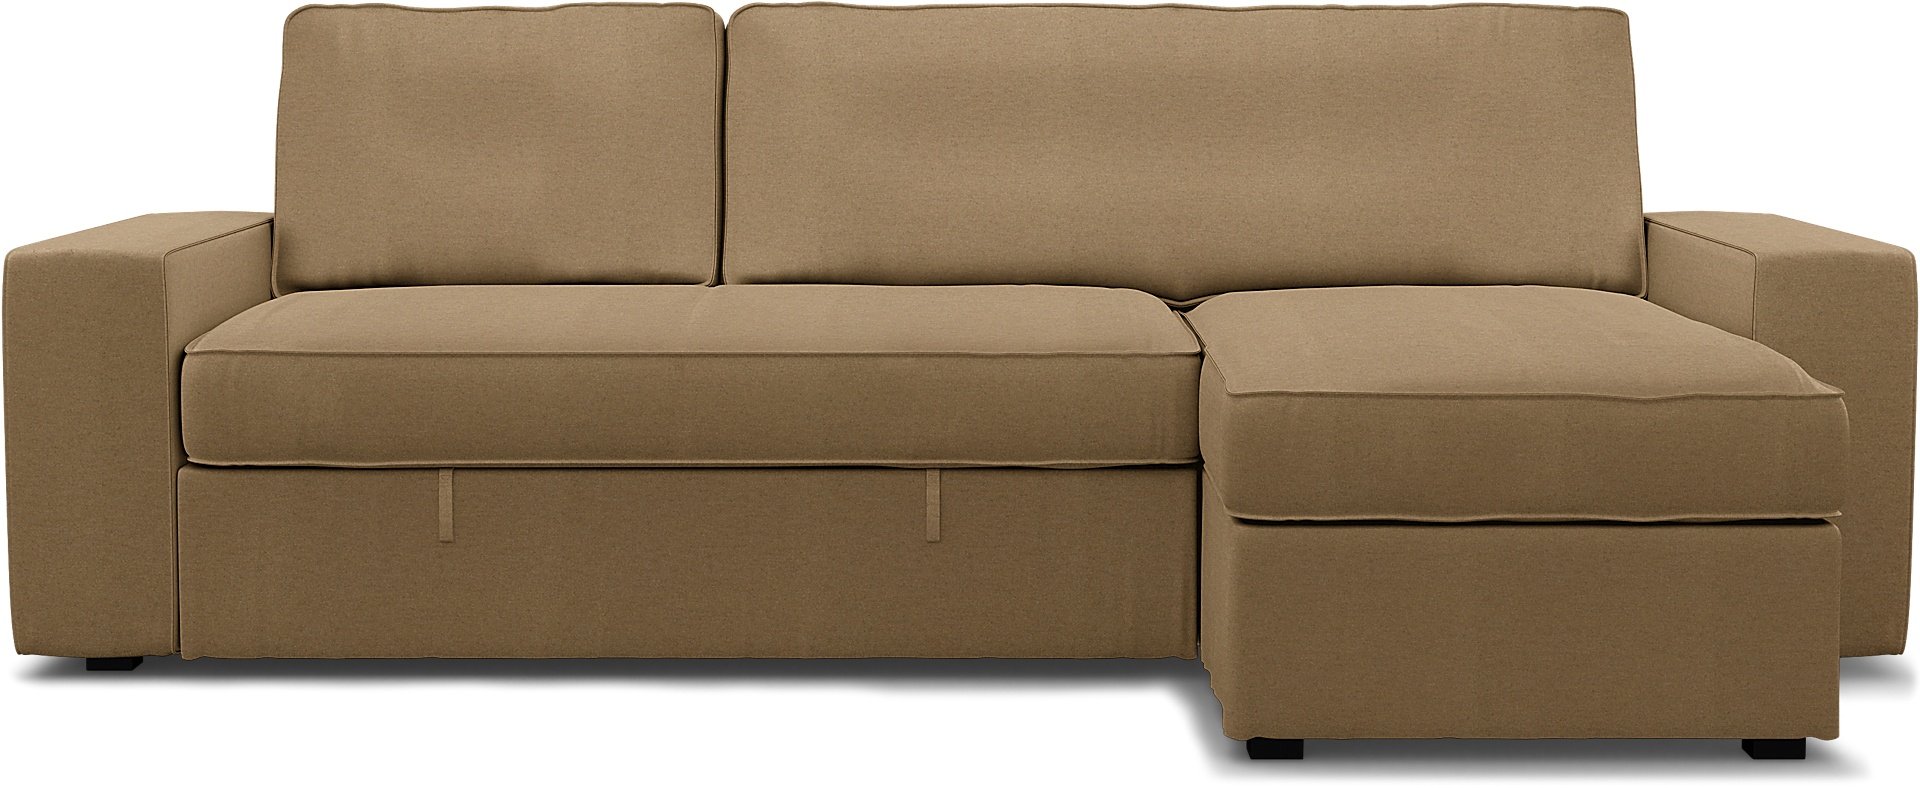 IKEA - Vilasund sofa bed with chaise cover, Sand, Wool - Bemz